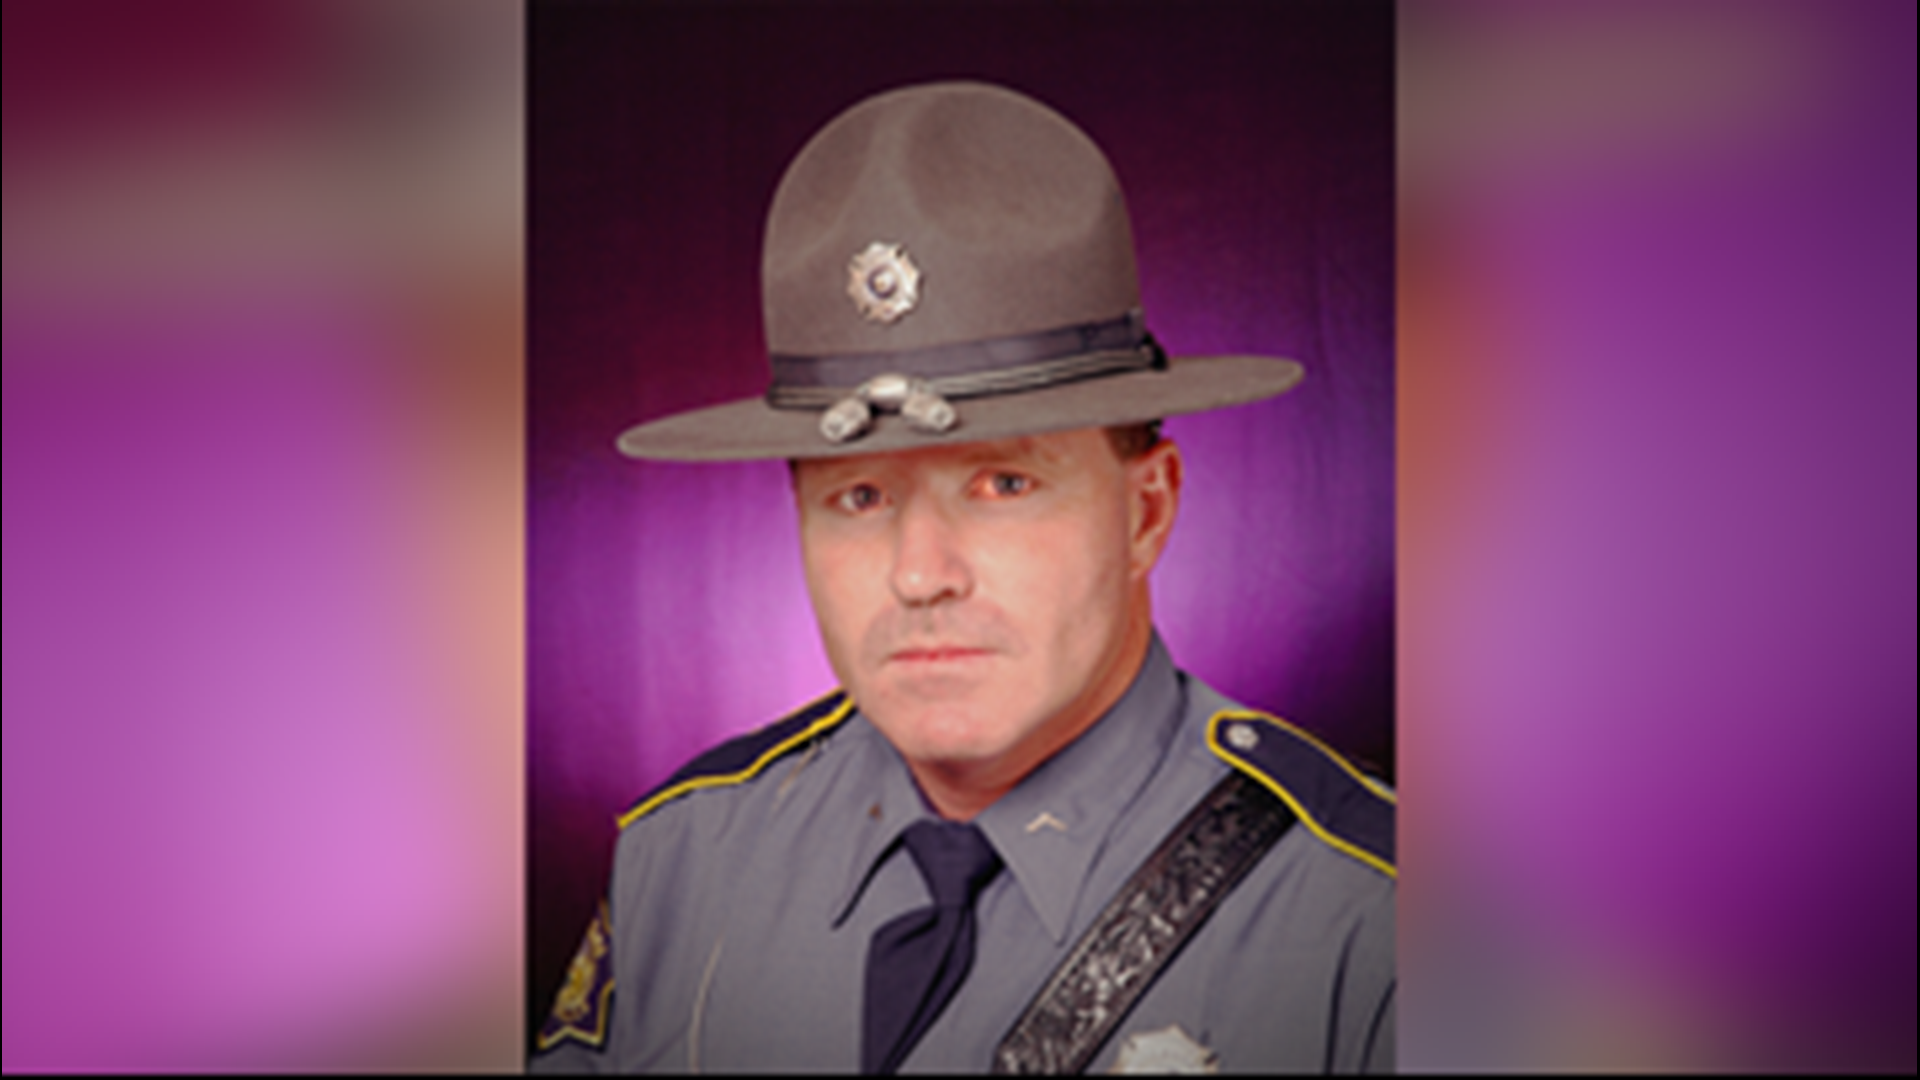 Former Arkansas State Trooper Arrested For Inappropriate Records Use